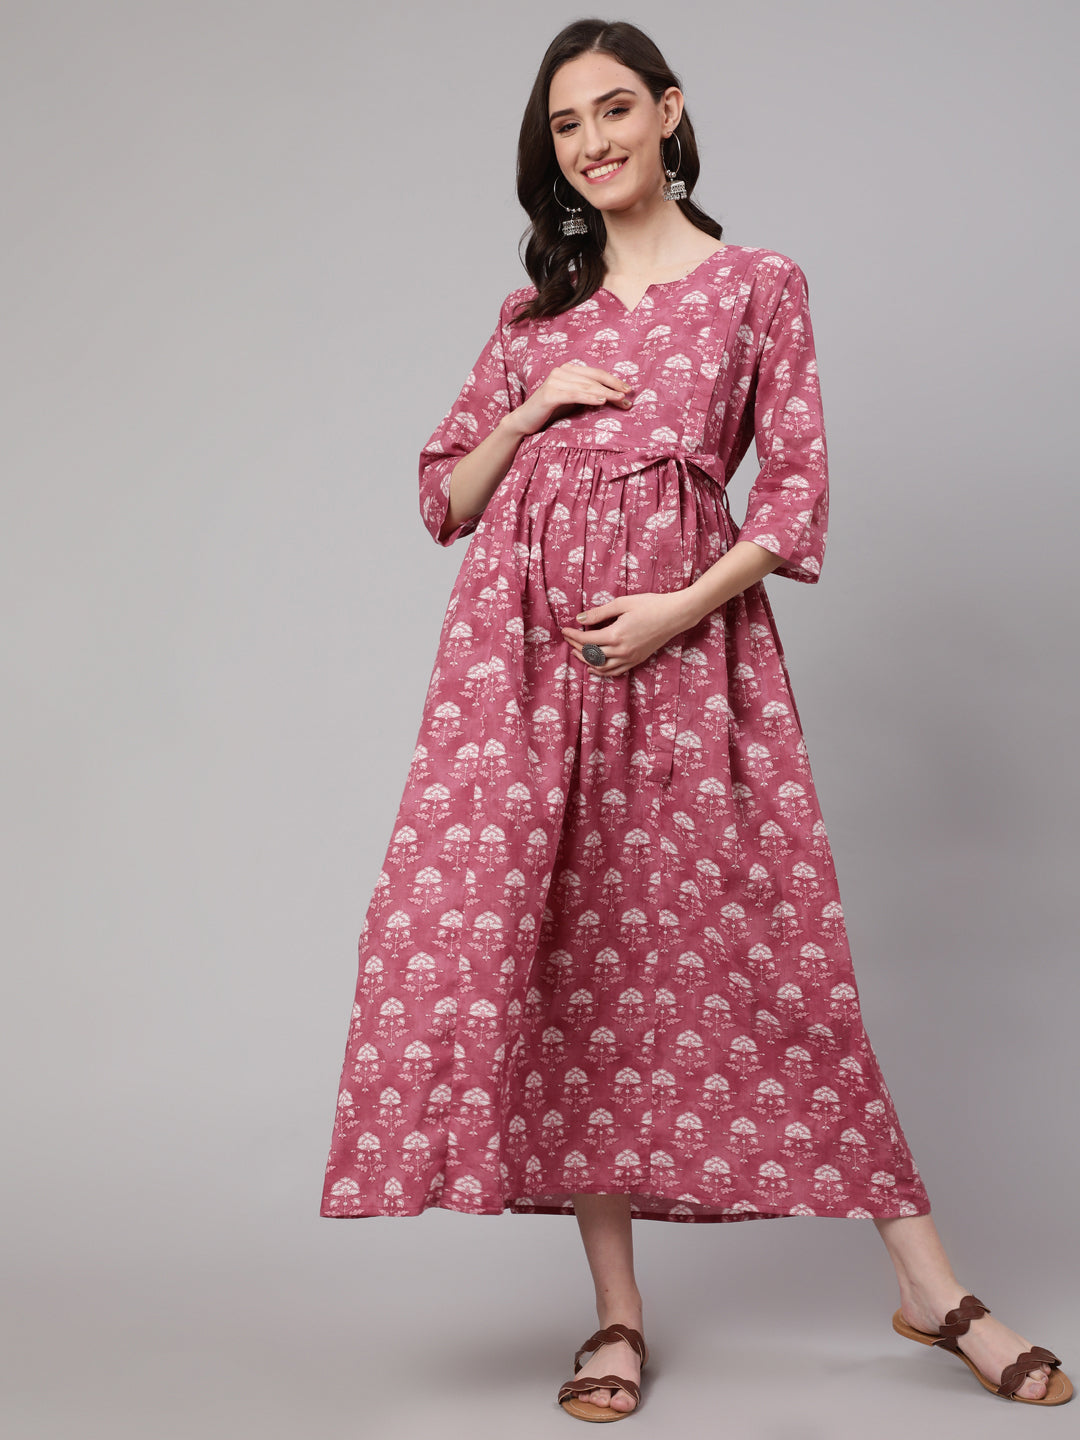 Women's Pink Floral Printed Flared Maternity Dress - Nayo Clothing